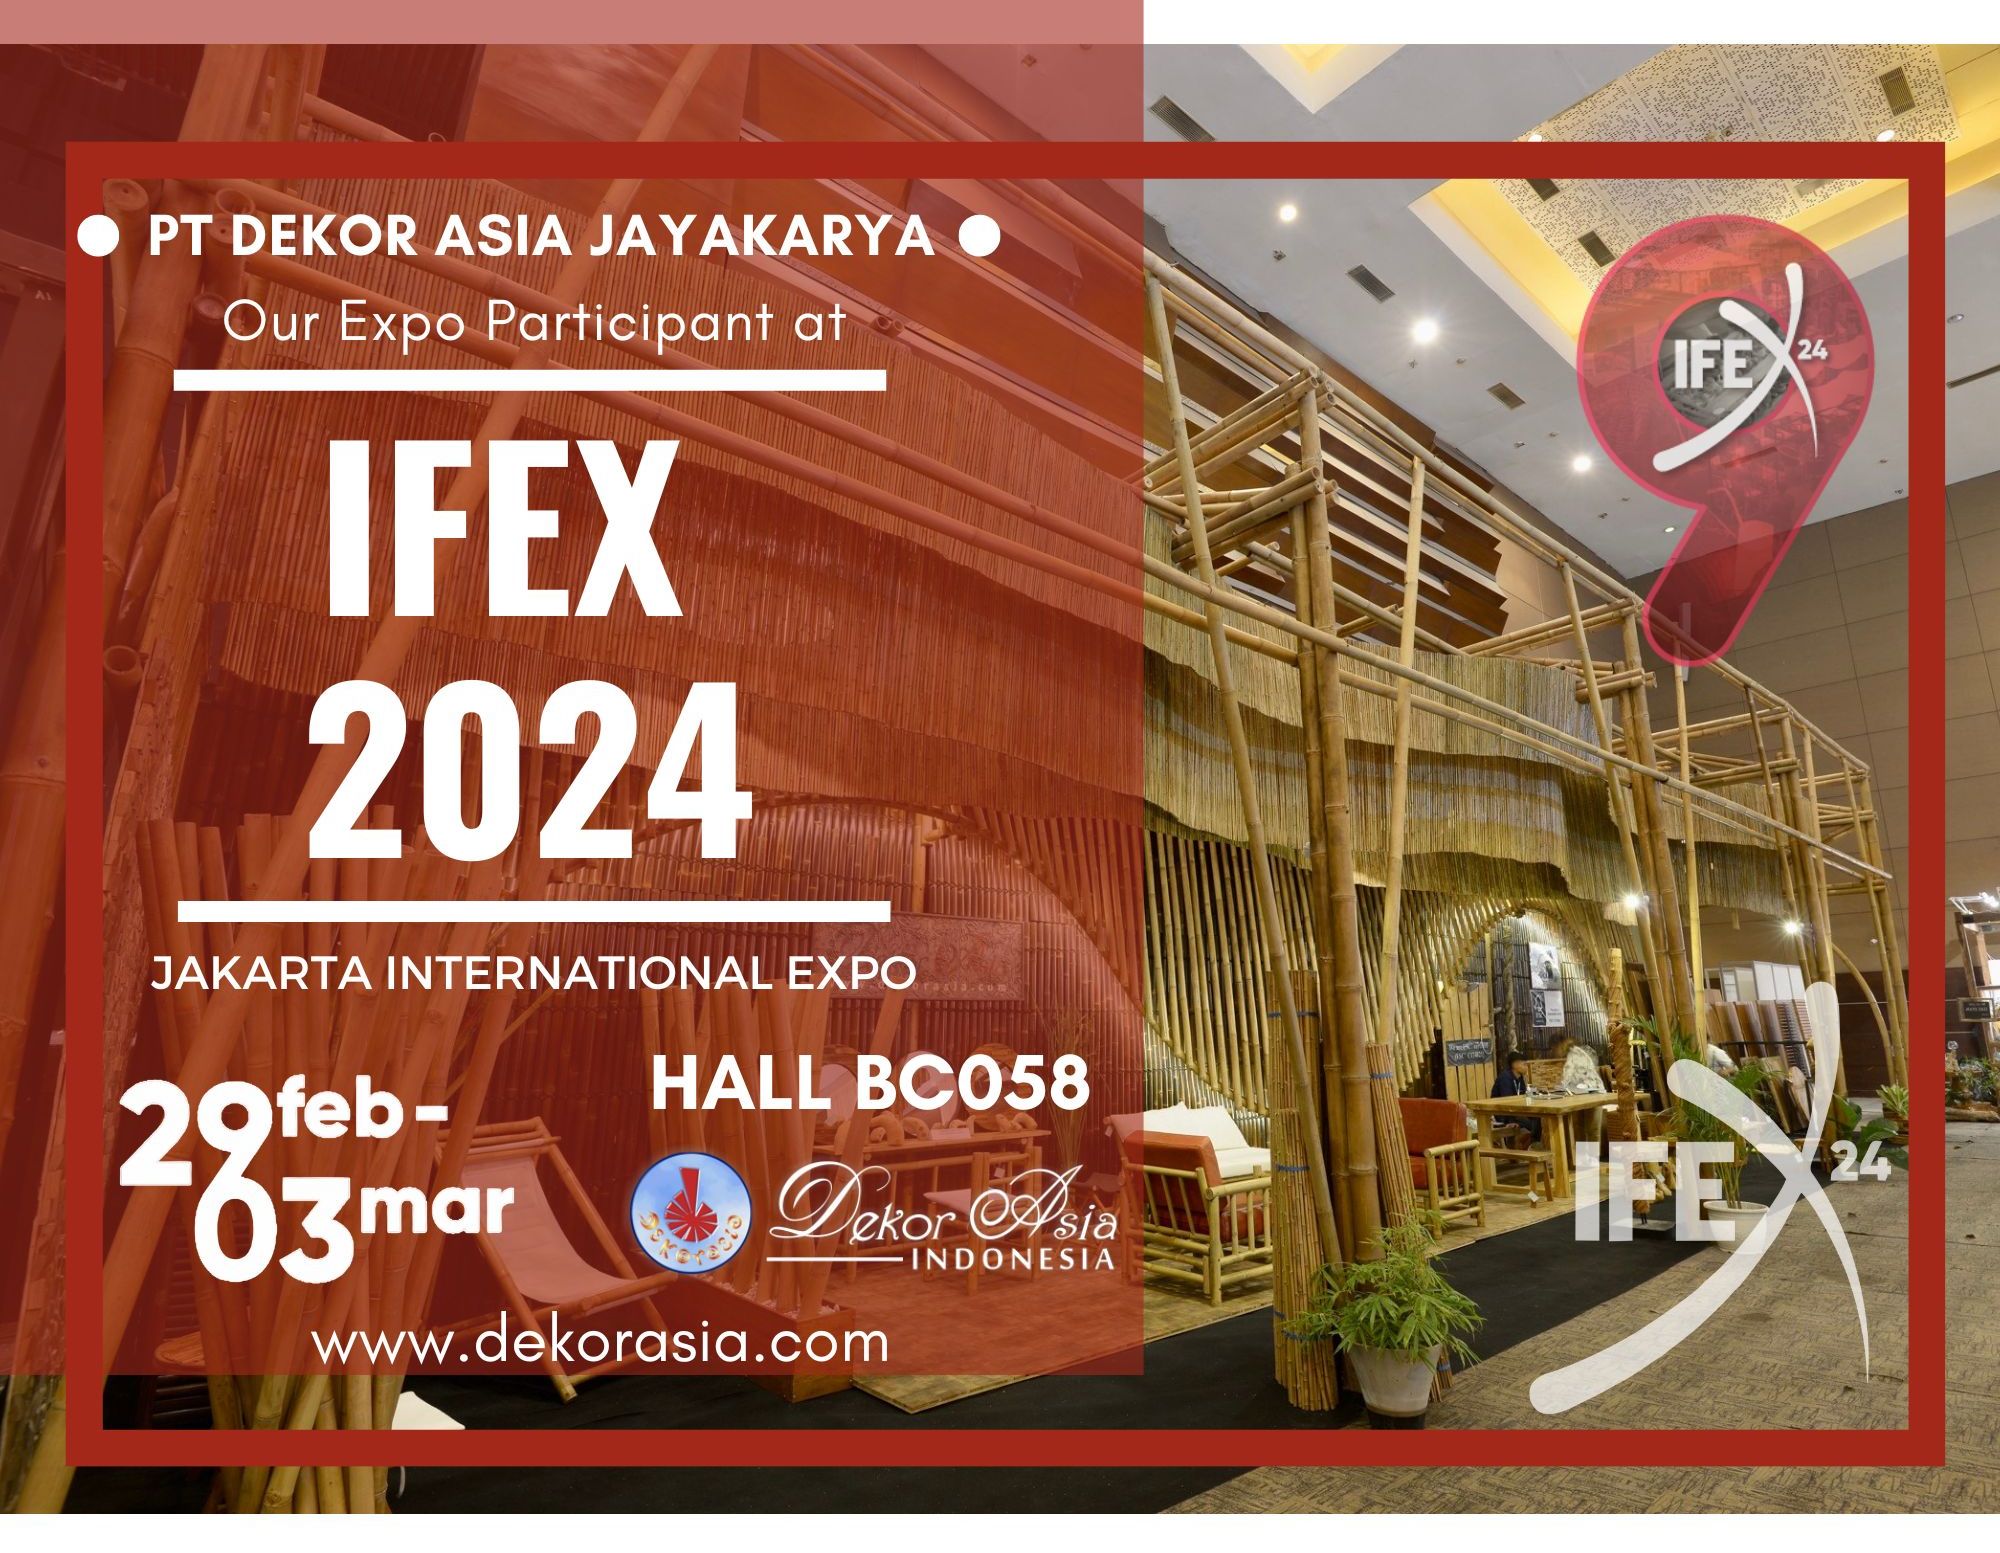 Our Expo Participant at IFEX 2024 - 29 February - 03 March 2024, Jakarta International Expo